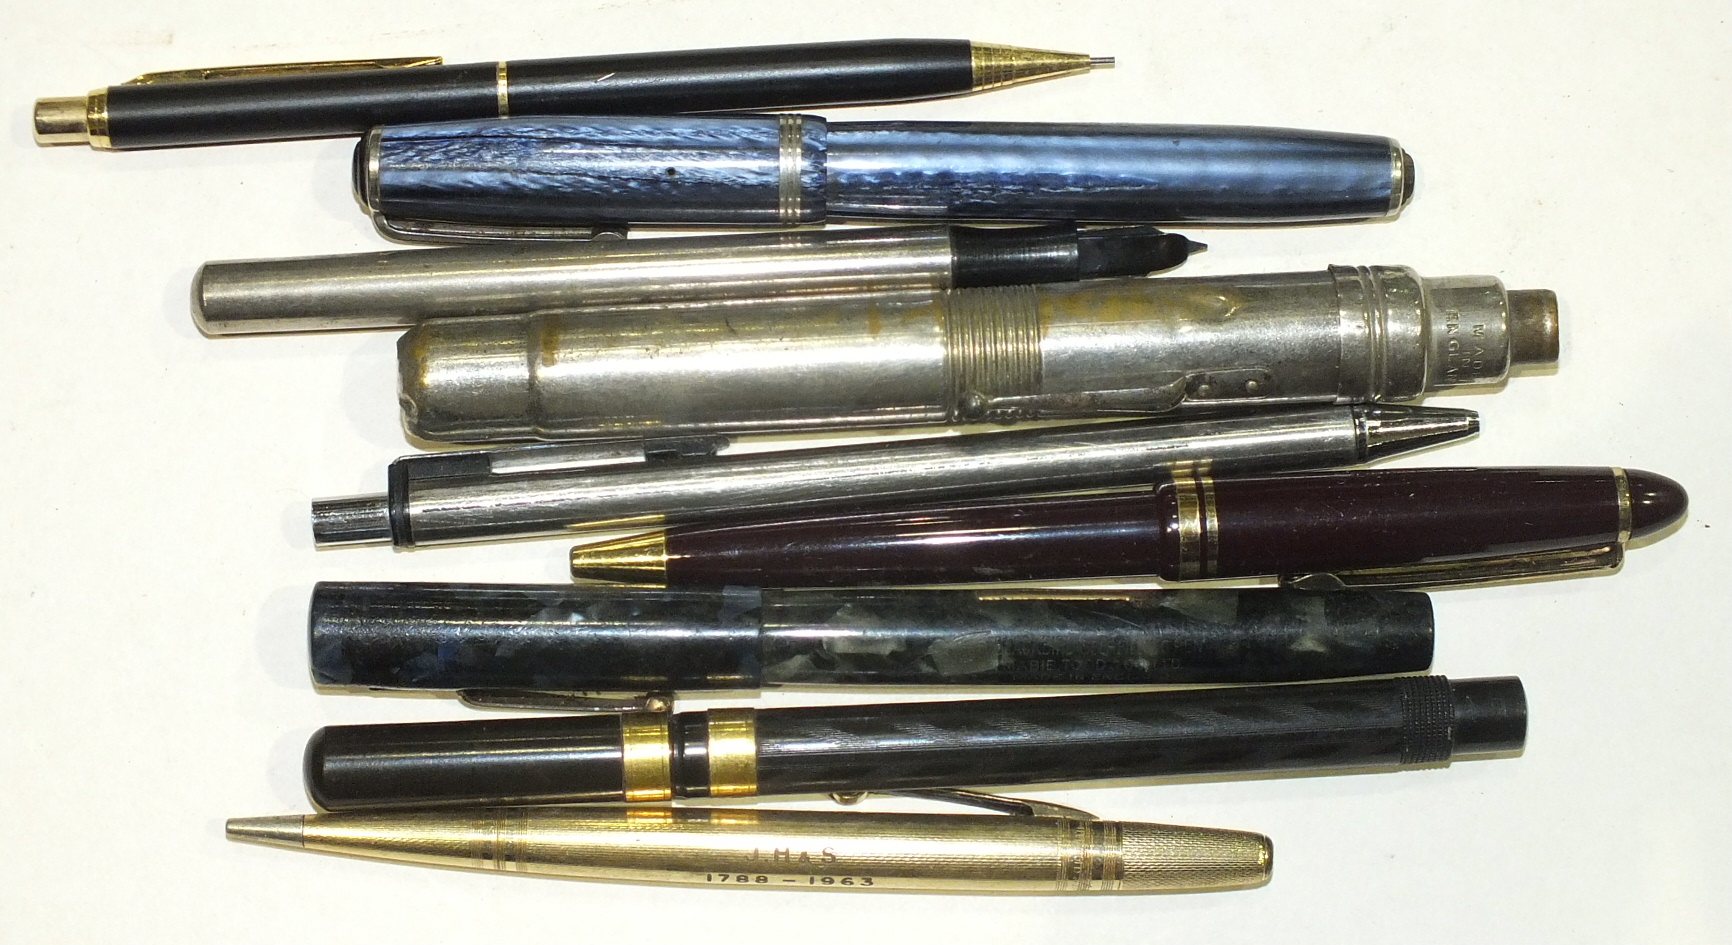 A small collection of fountain pens, a tartanware napkin ring, (Maclean), a small bronze compass, - Image 3 of 3